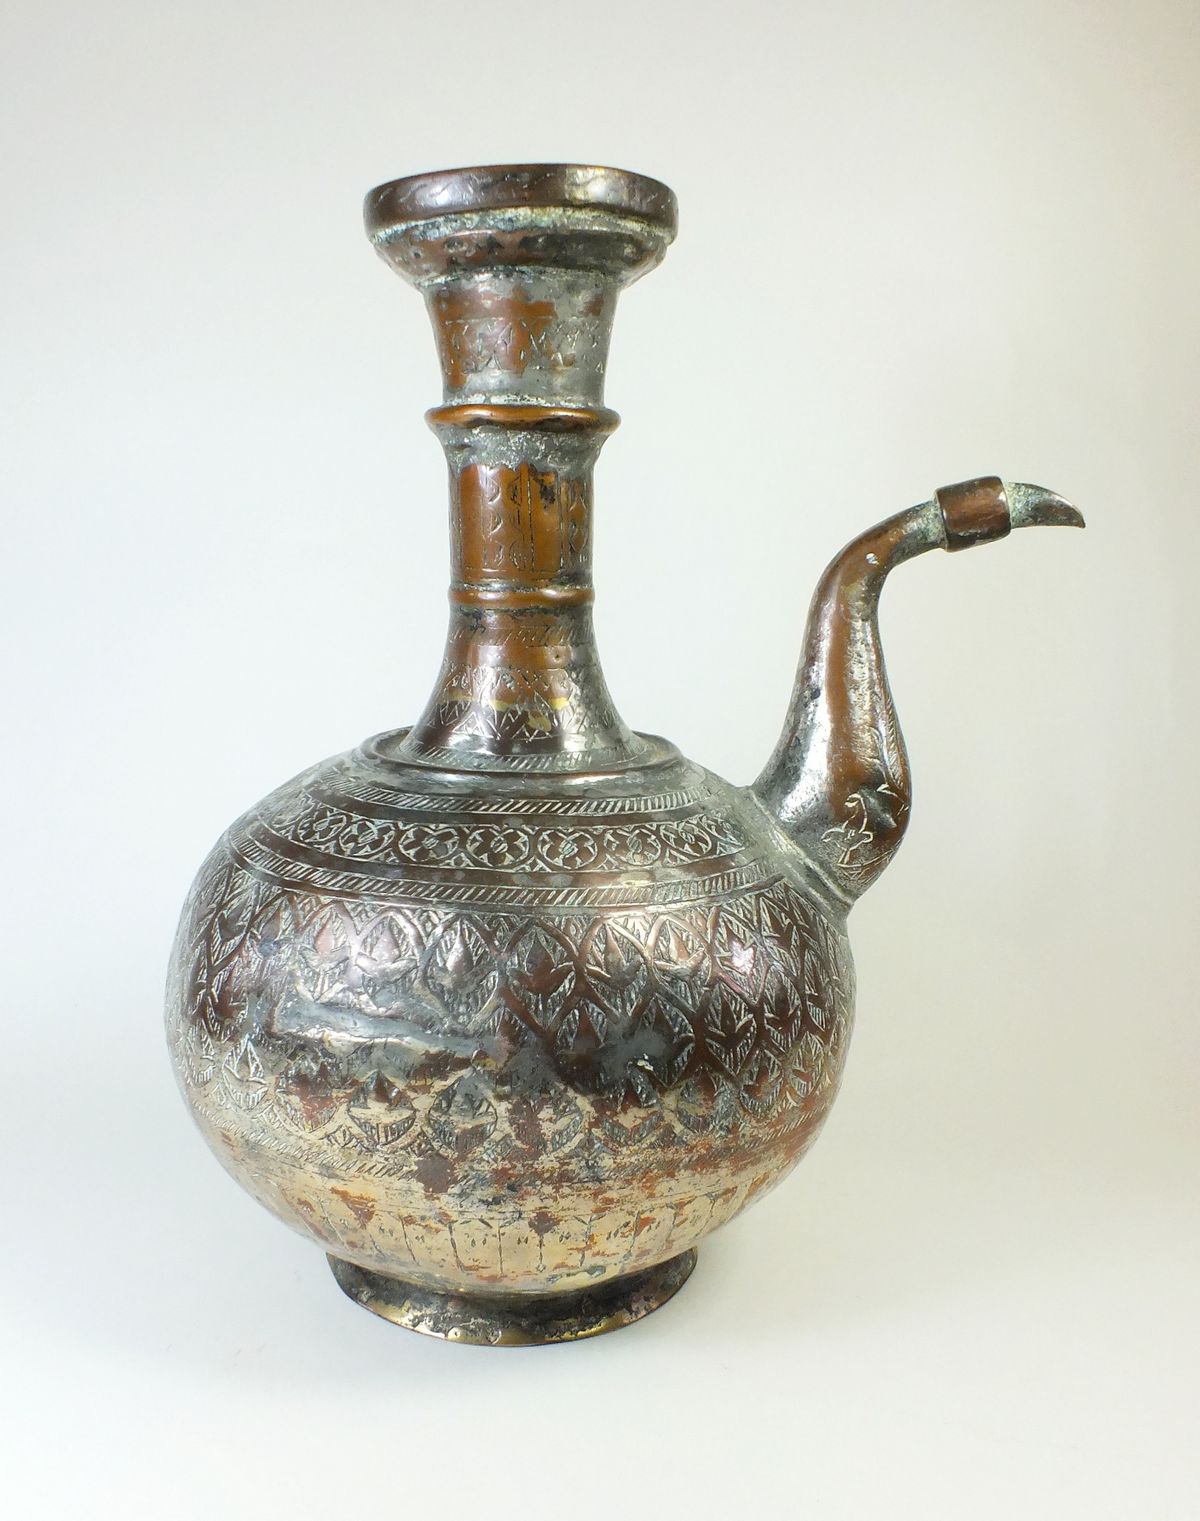 A 19th century Persian or Afghan Islamic tinned copper aftaba/water pot, 29cm tall